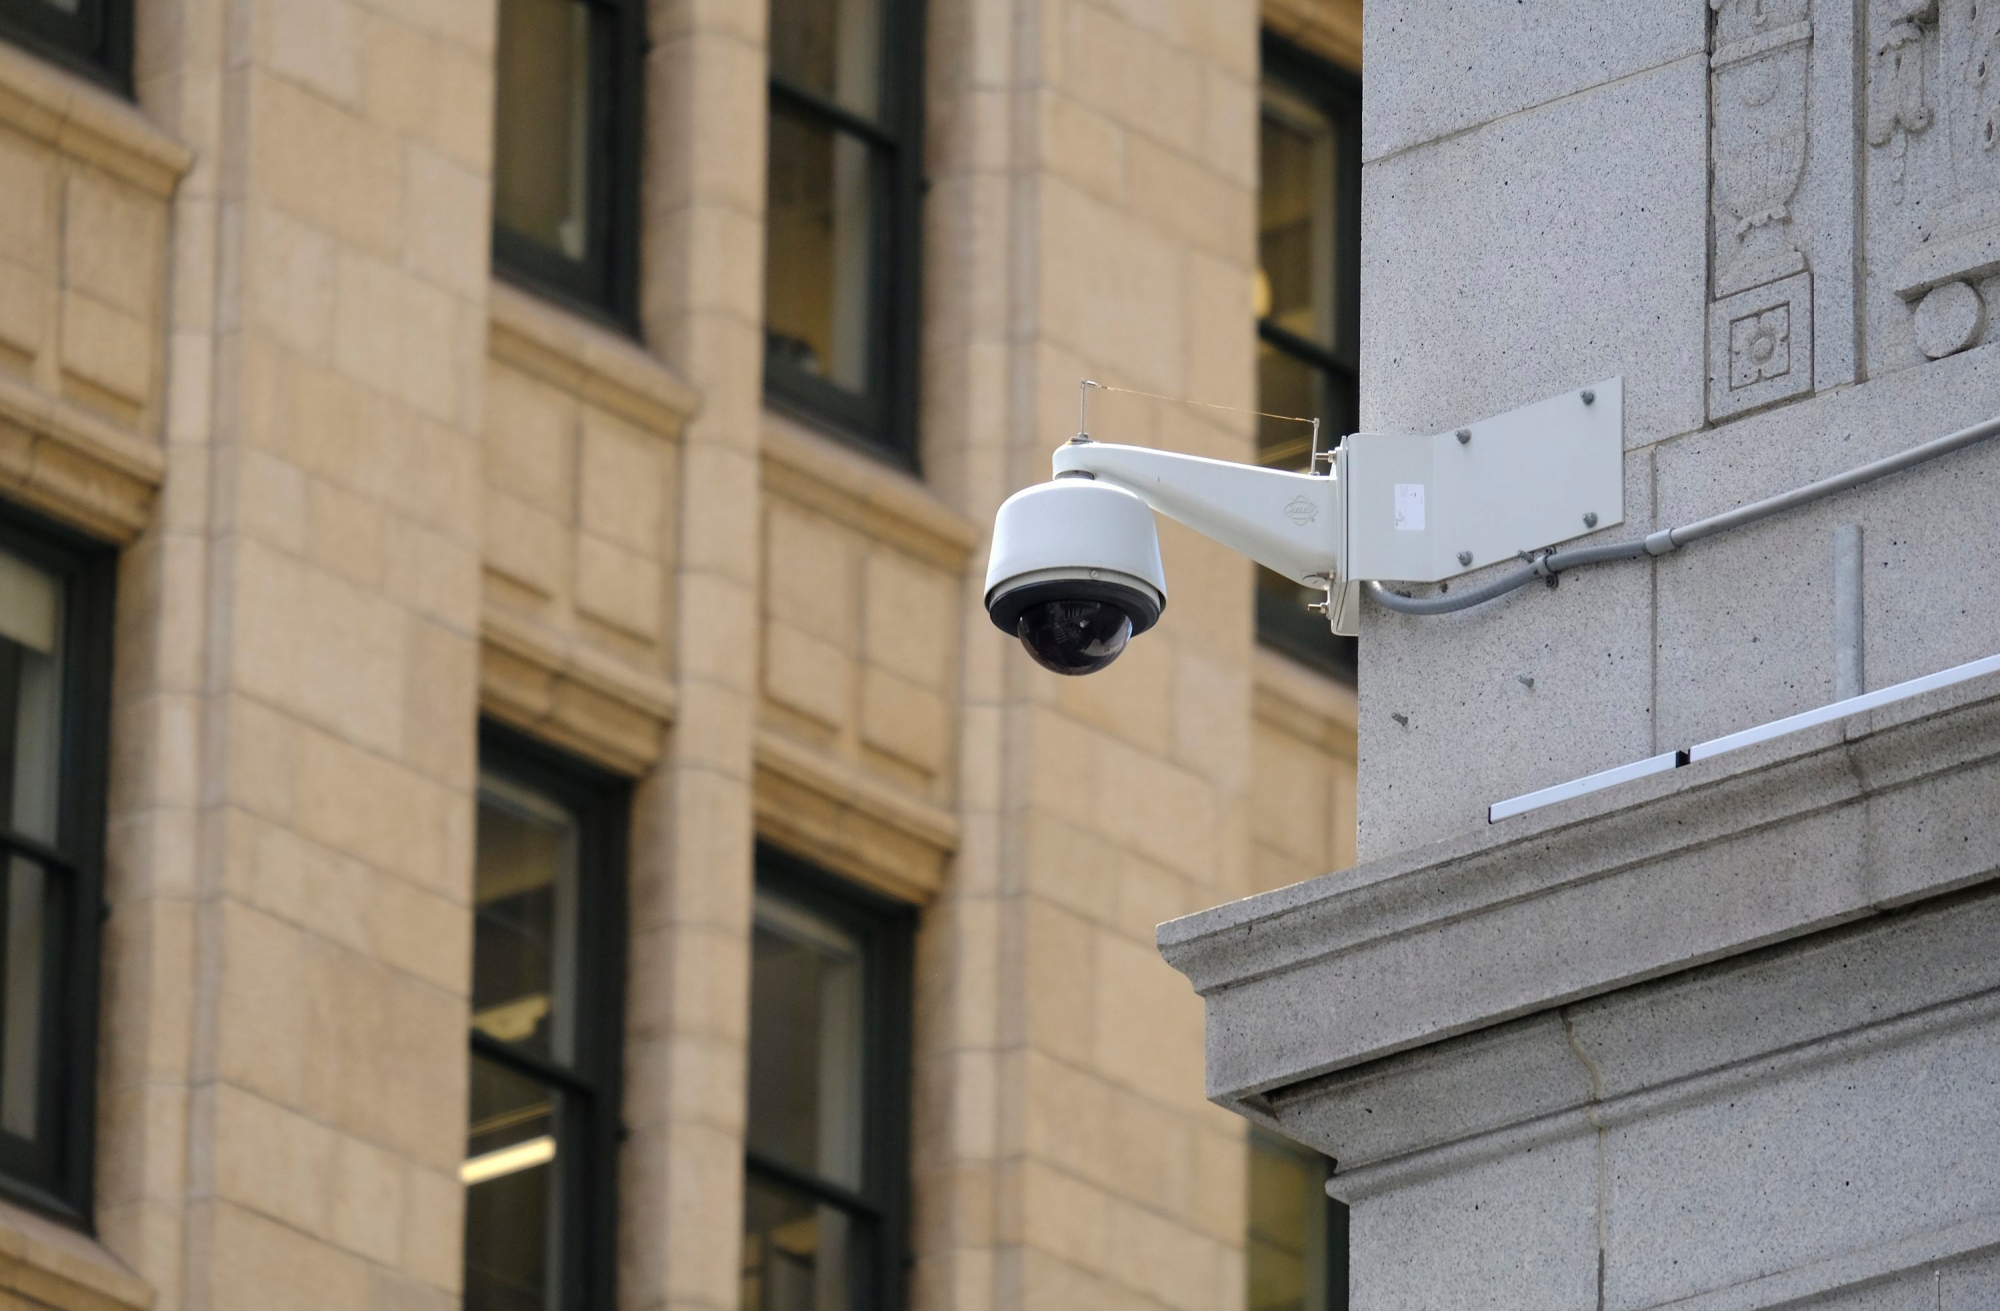 In this photo taken Tuesday, May 7, 2019, is a security camera in the Financial District of San Francisco. San Francisco is on track to become the first U.S. city to ban the use of facial recognition by police and other city agencies as the technology creeps increasingly into daily life. (AP Photo/Eric Risberg) Facial Recognition Backlash